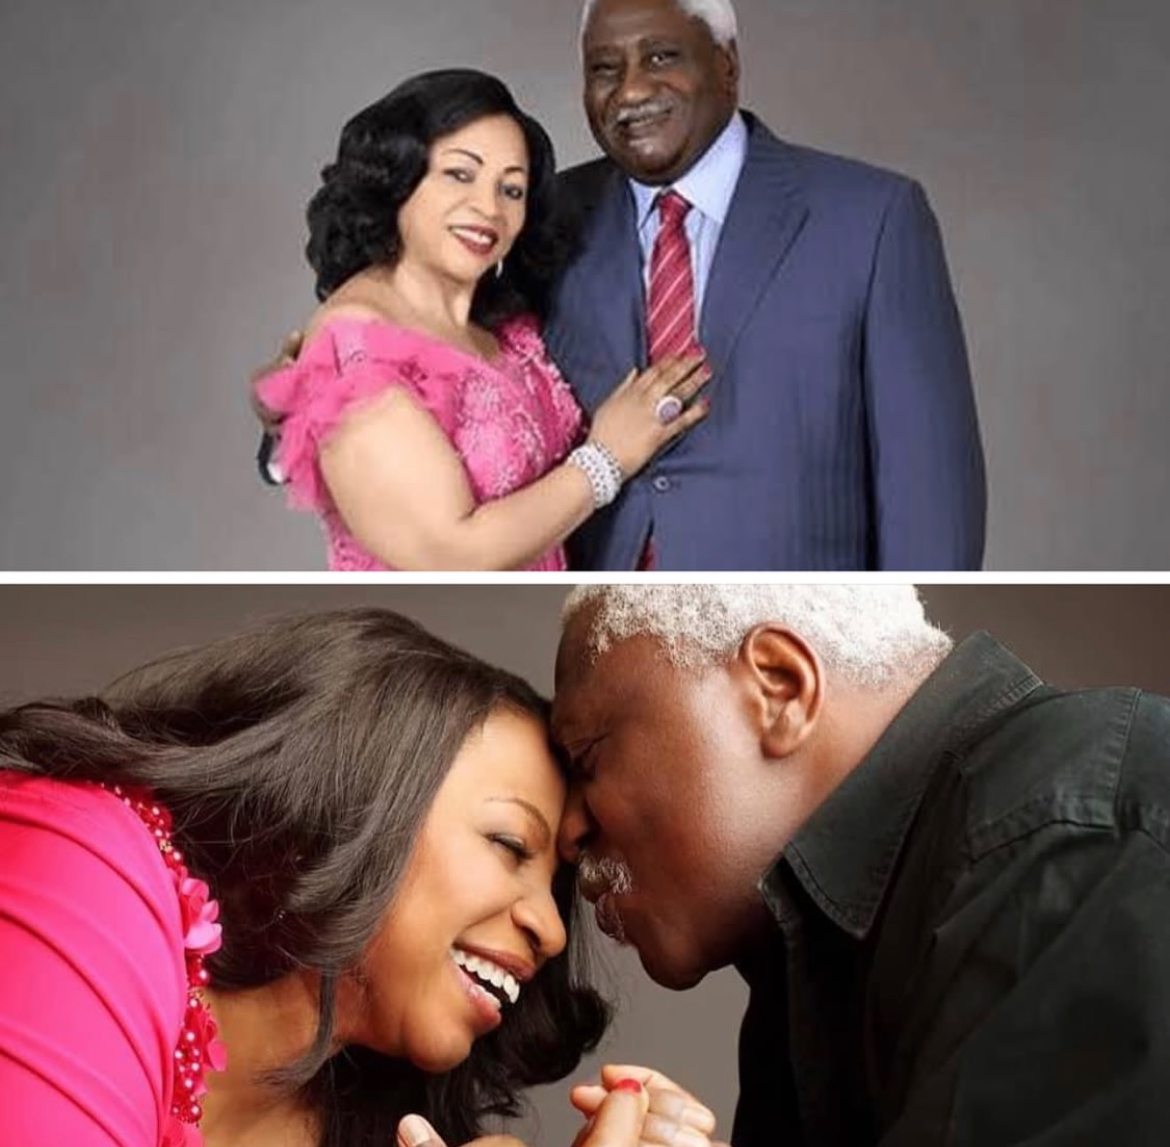 Nigeria’s Wealthiest Woman, Folorunsho Alakija, Separates From Her husband After Over 30 Years Of Marriage | MarvelTvUpdates